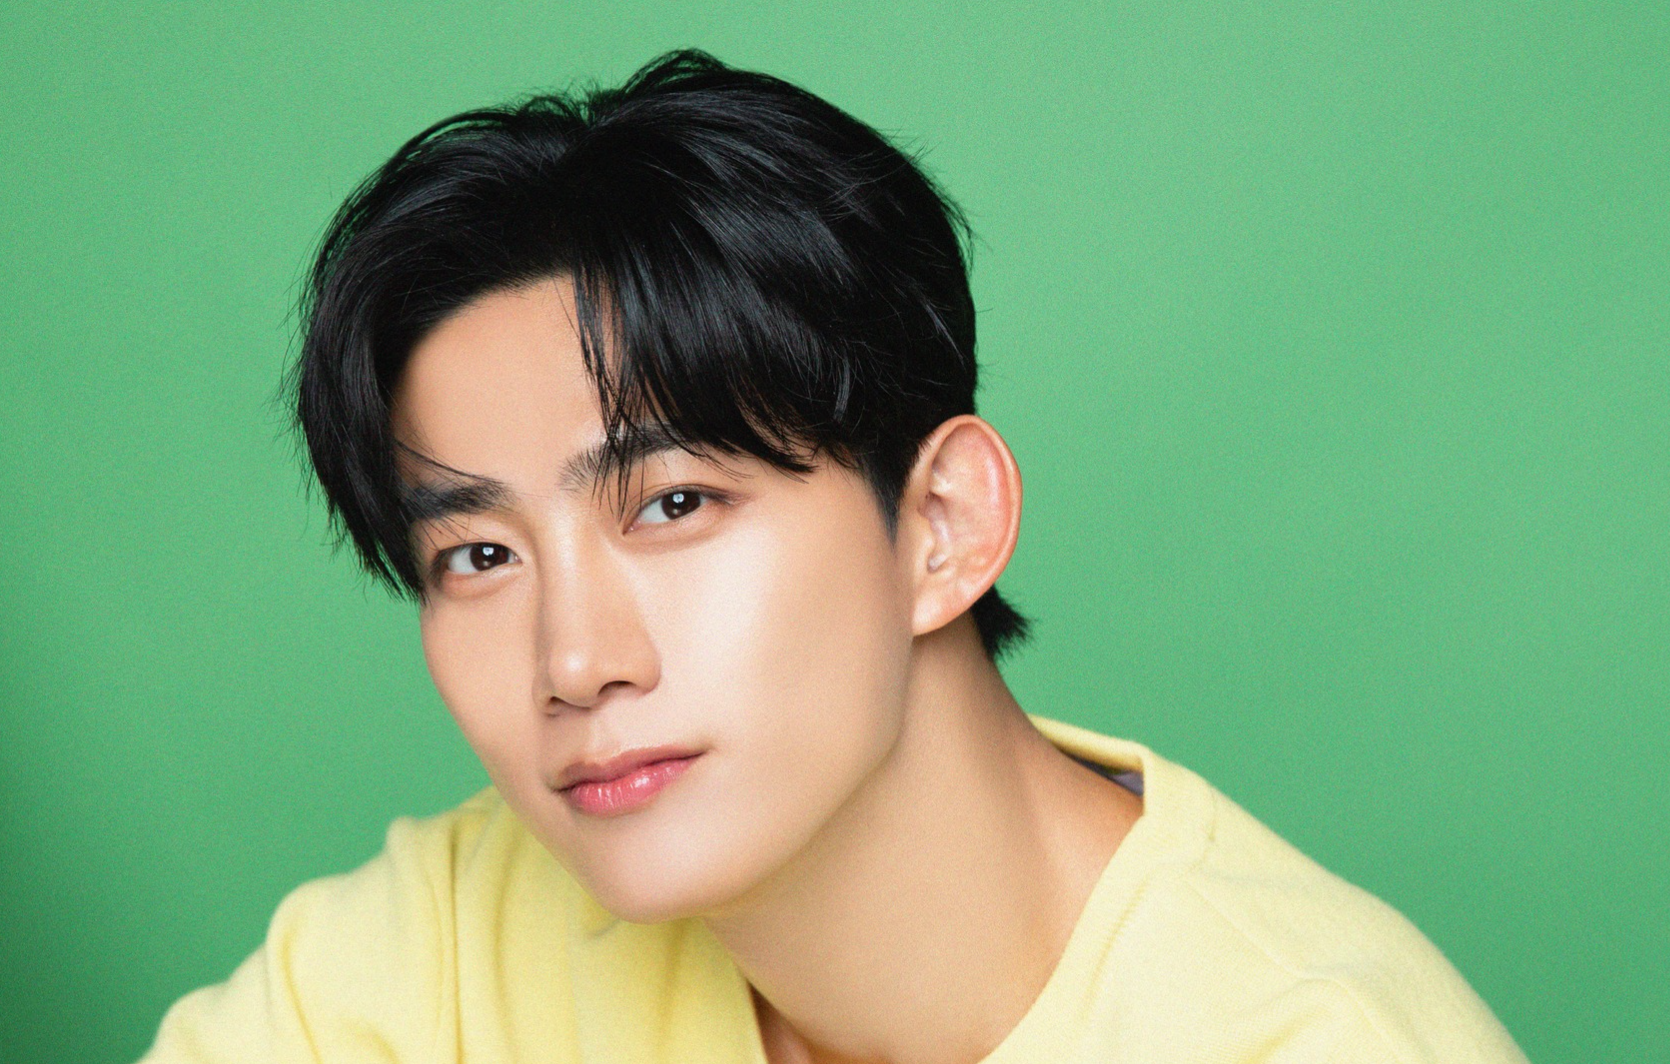 The 'XO, Kitty' star discussed his career that has spanned over 15 years and his plans on achieving his acting goal